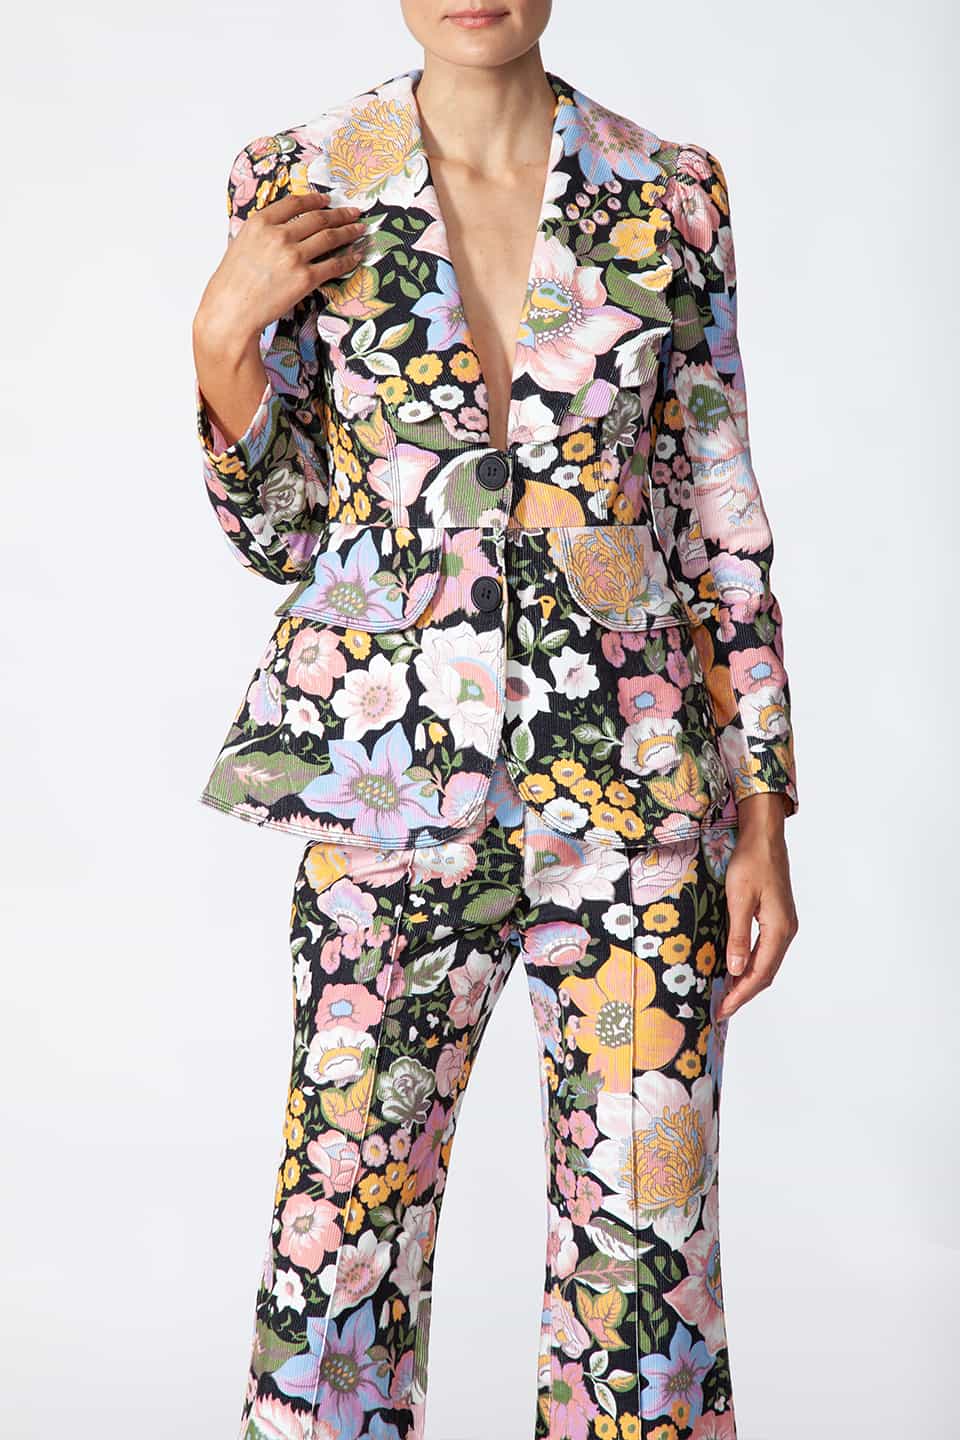 Thumbnail for Product gallery 6, Woman in pose for front view, wearing waist fitted jacket in corduroy with floral print. Trendy jacket from European Stylist Manoush.